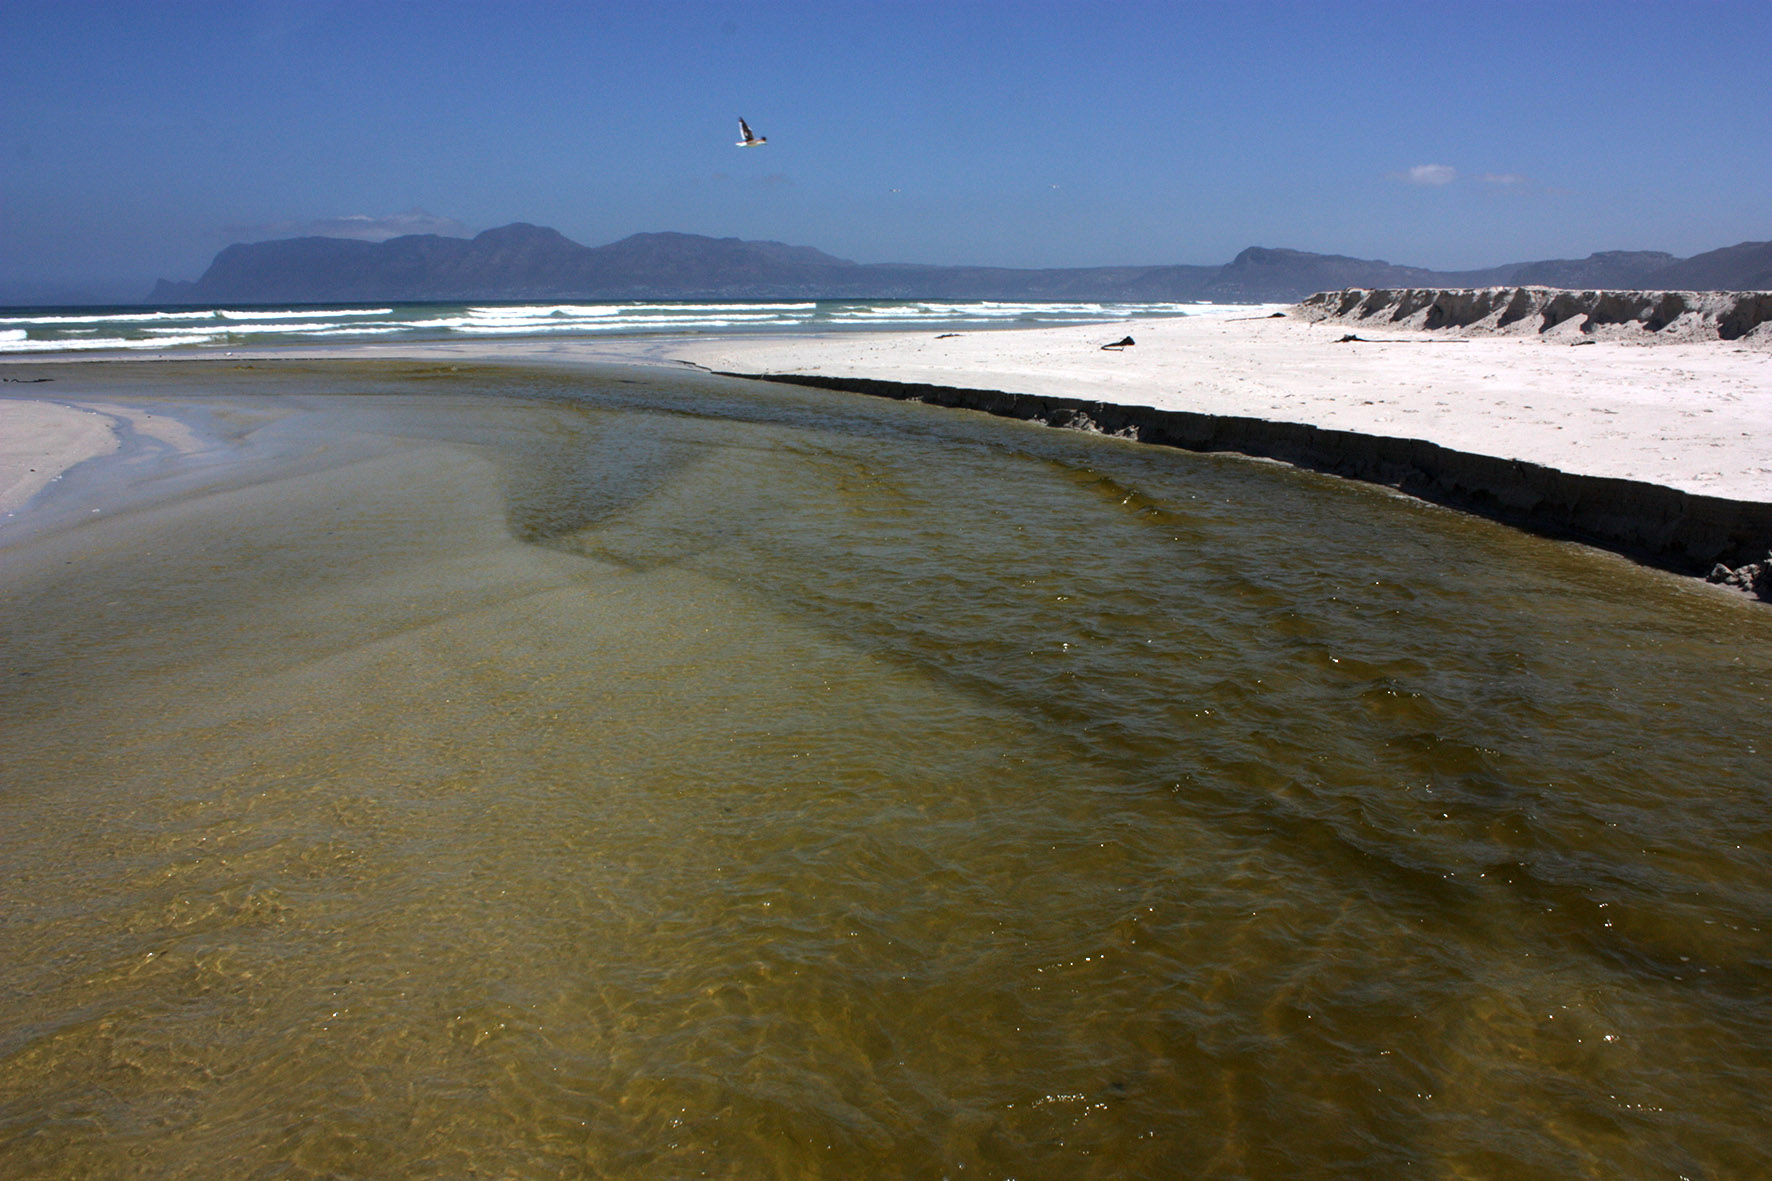 Effluent flows into False Bay from the waste water treatment works at Strandfontein. “Poor” water quality was found at nearly half the 49 water quality monitoring sites in False Bay, including popular swimming and surfing beaches. Photo: Steve Kretzmann/WCN